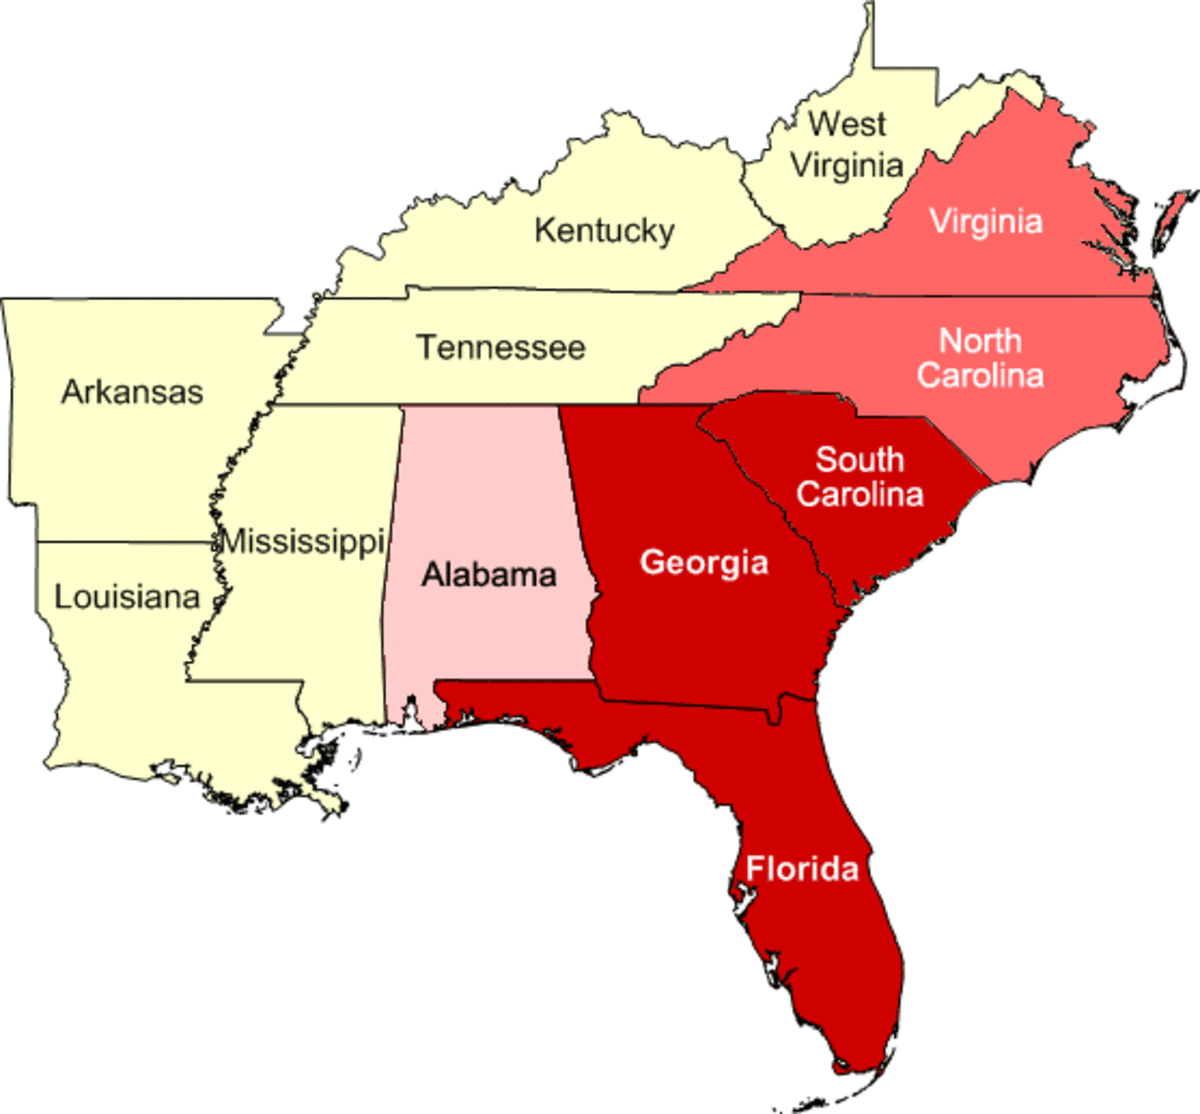 The American Southeast